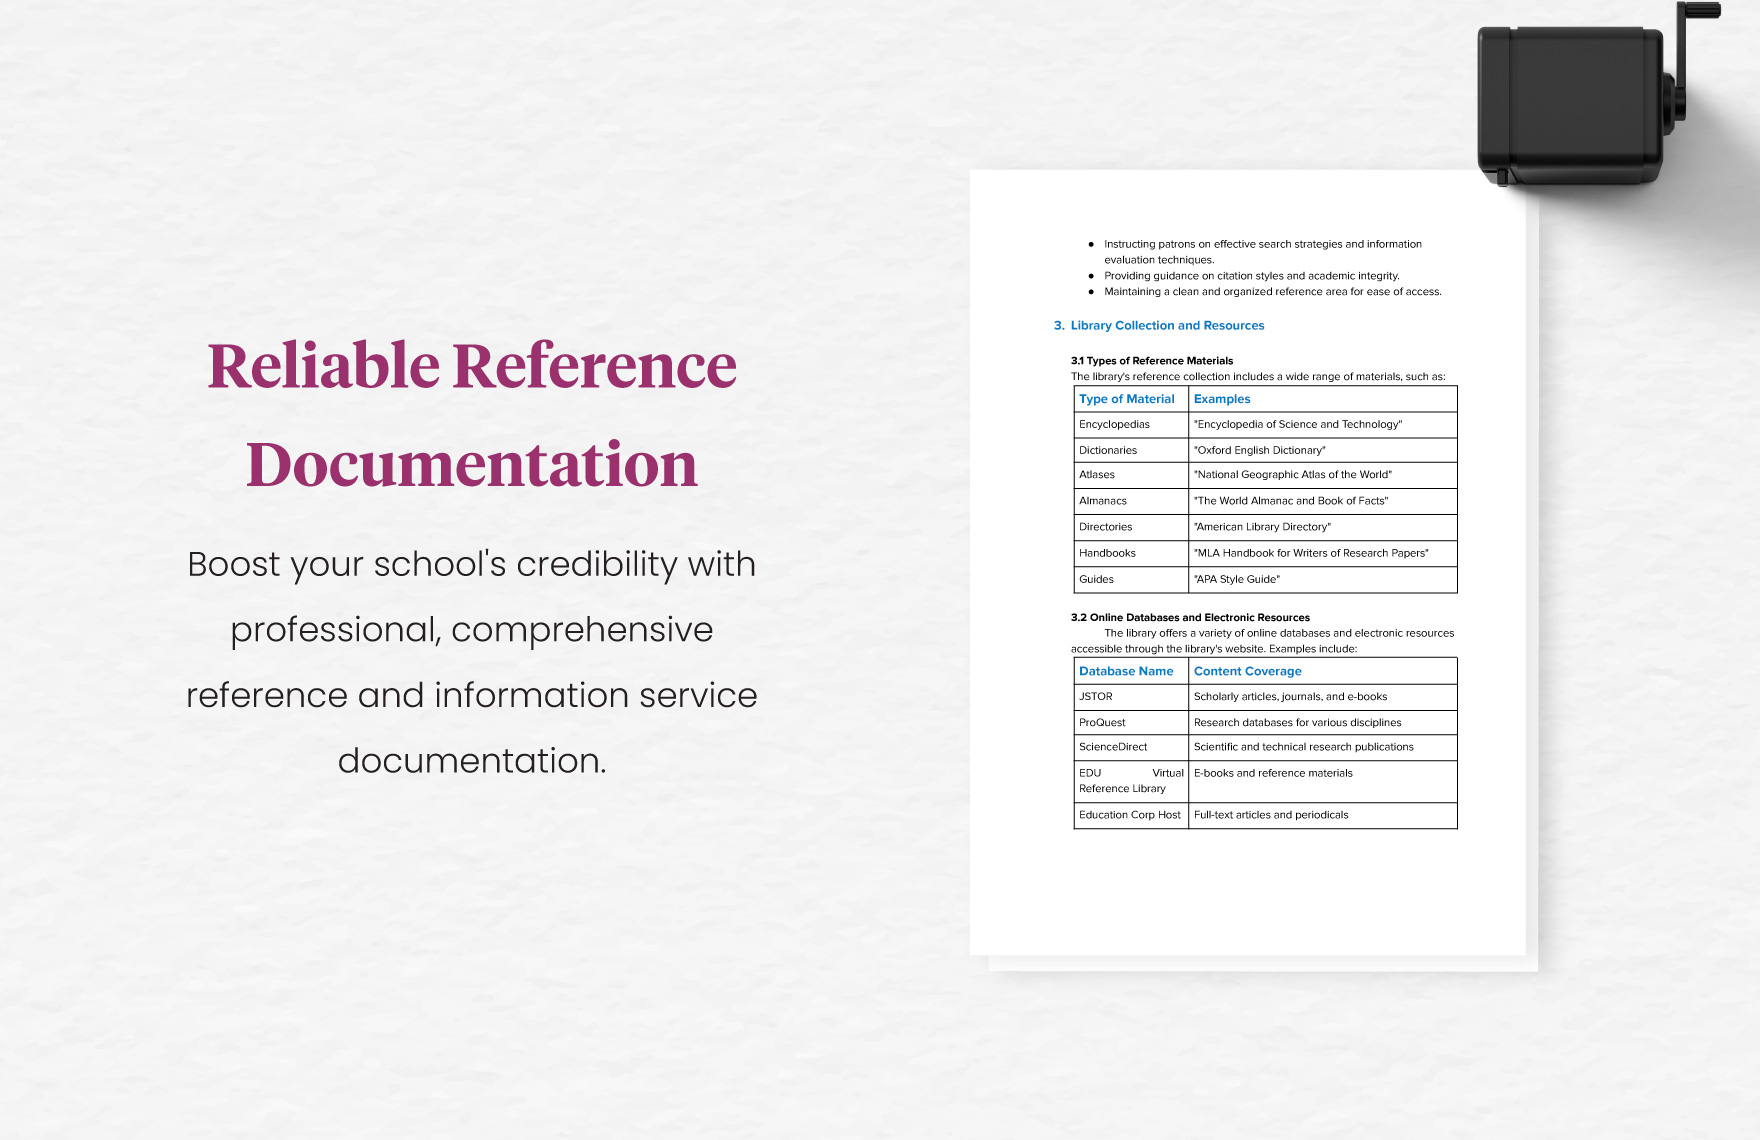 School Library Reference Desk Policies and Procedures Manual Template